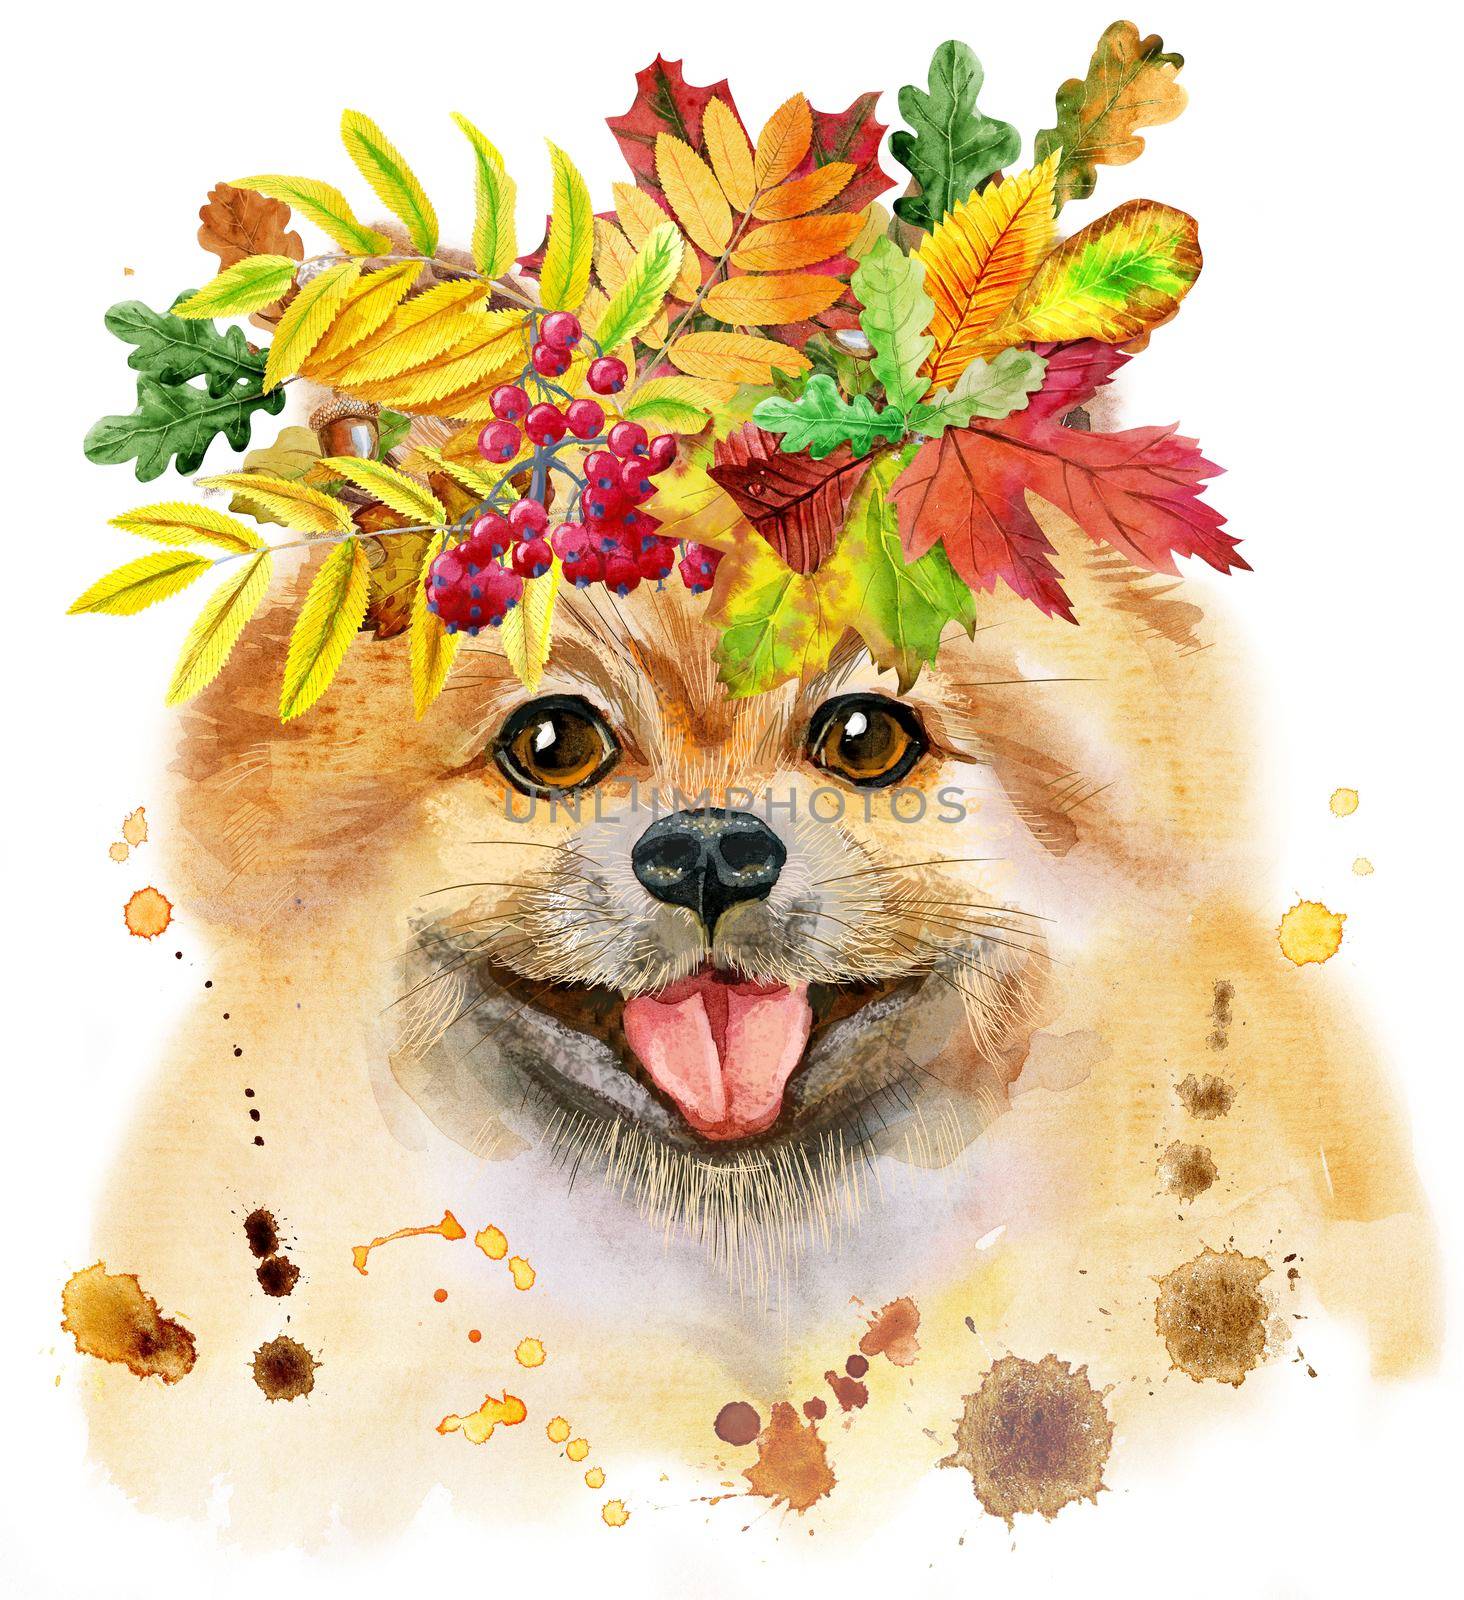 Watercolor portrait of dog pomeranian spitz with wreath of autumn leaves by NataOmsk